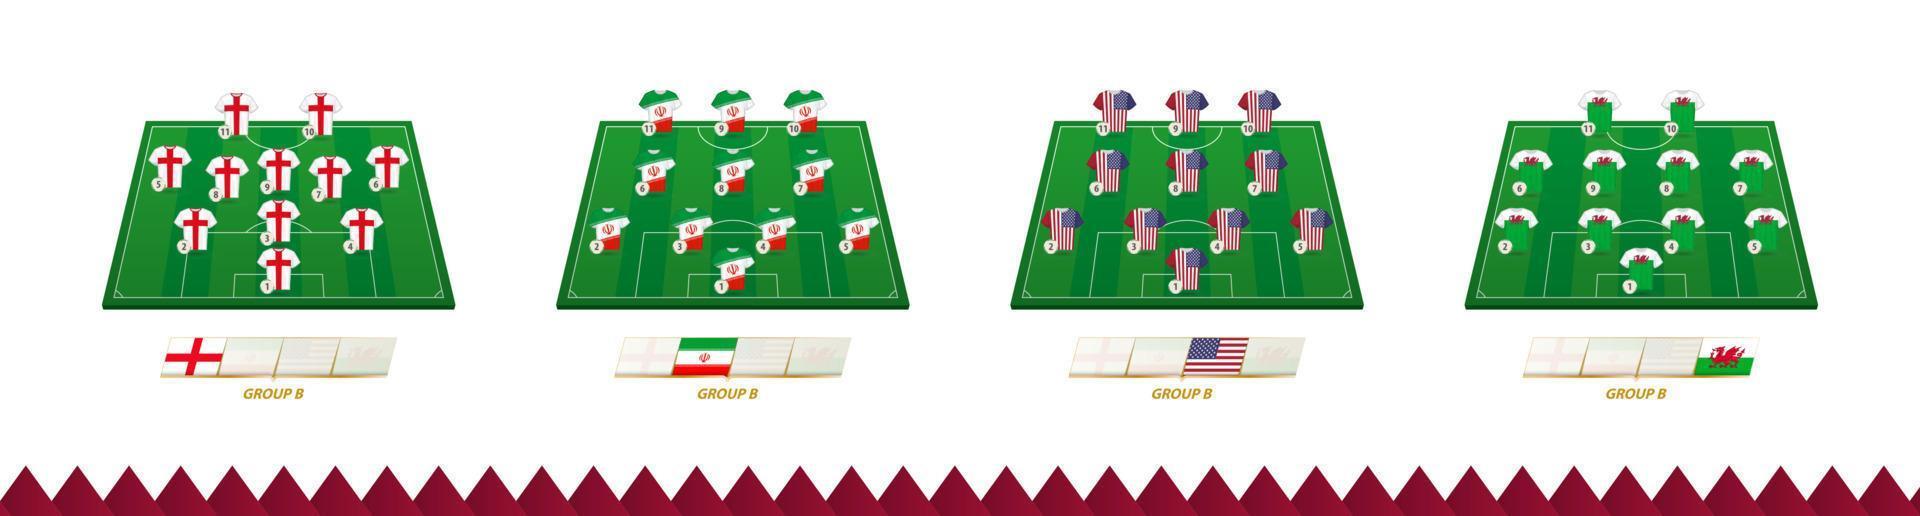 Football field with team lineup for Group B of soccer competition. vector